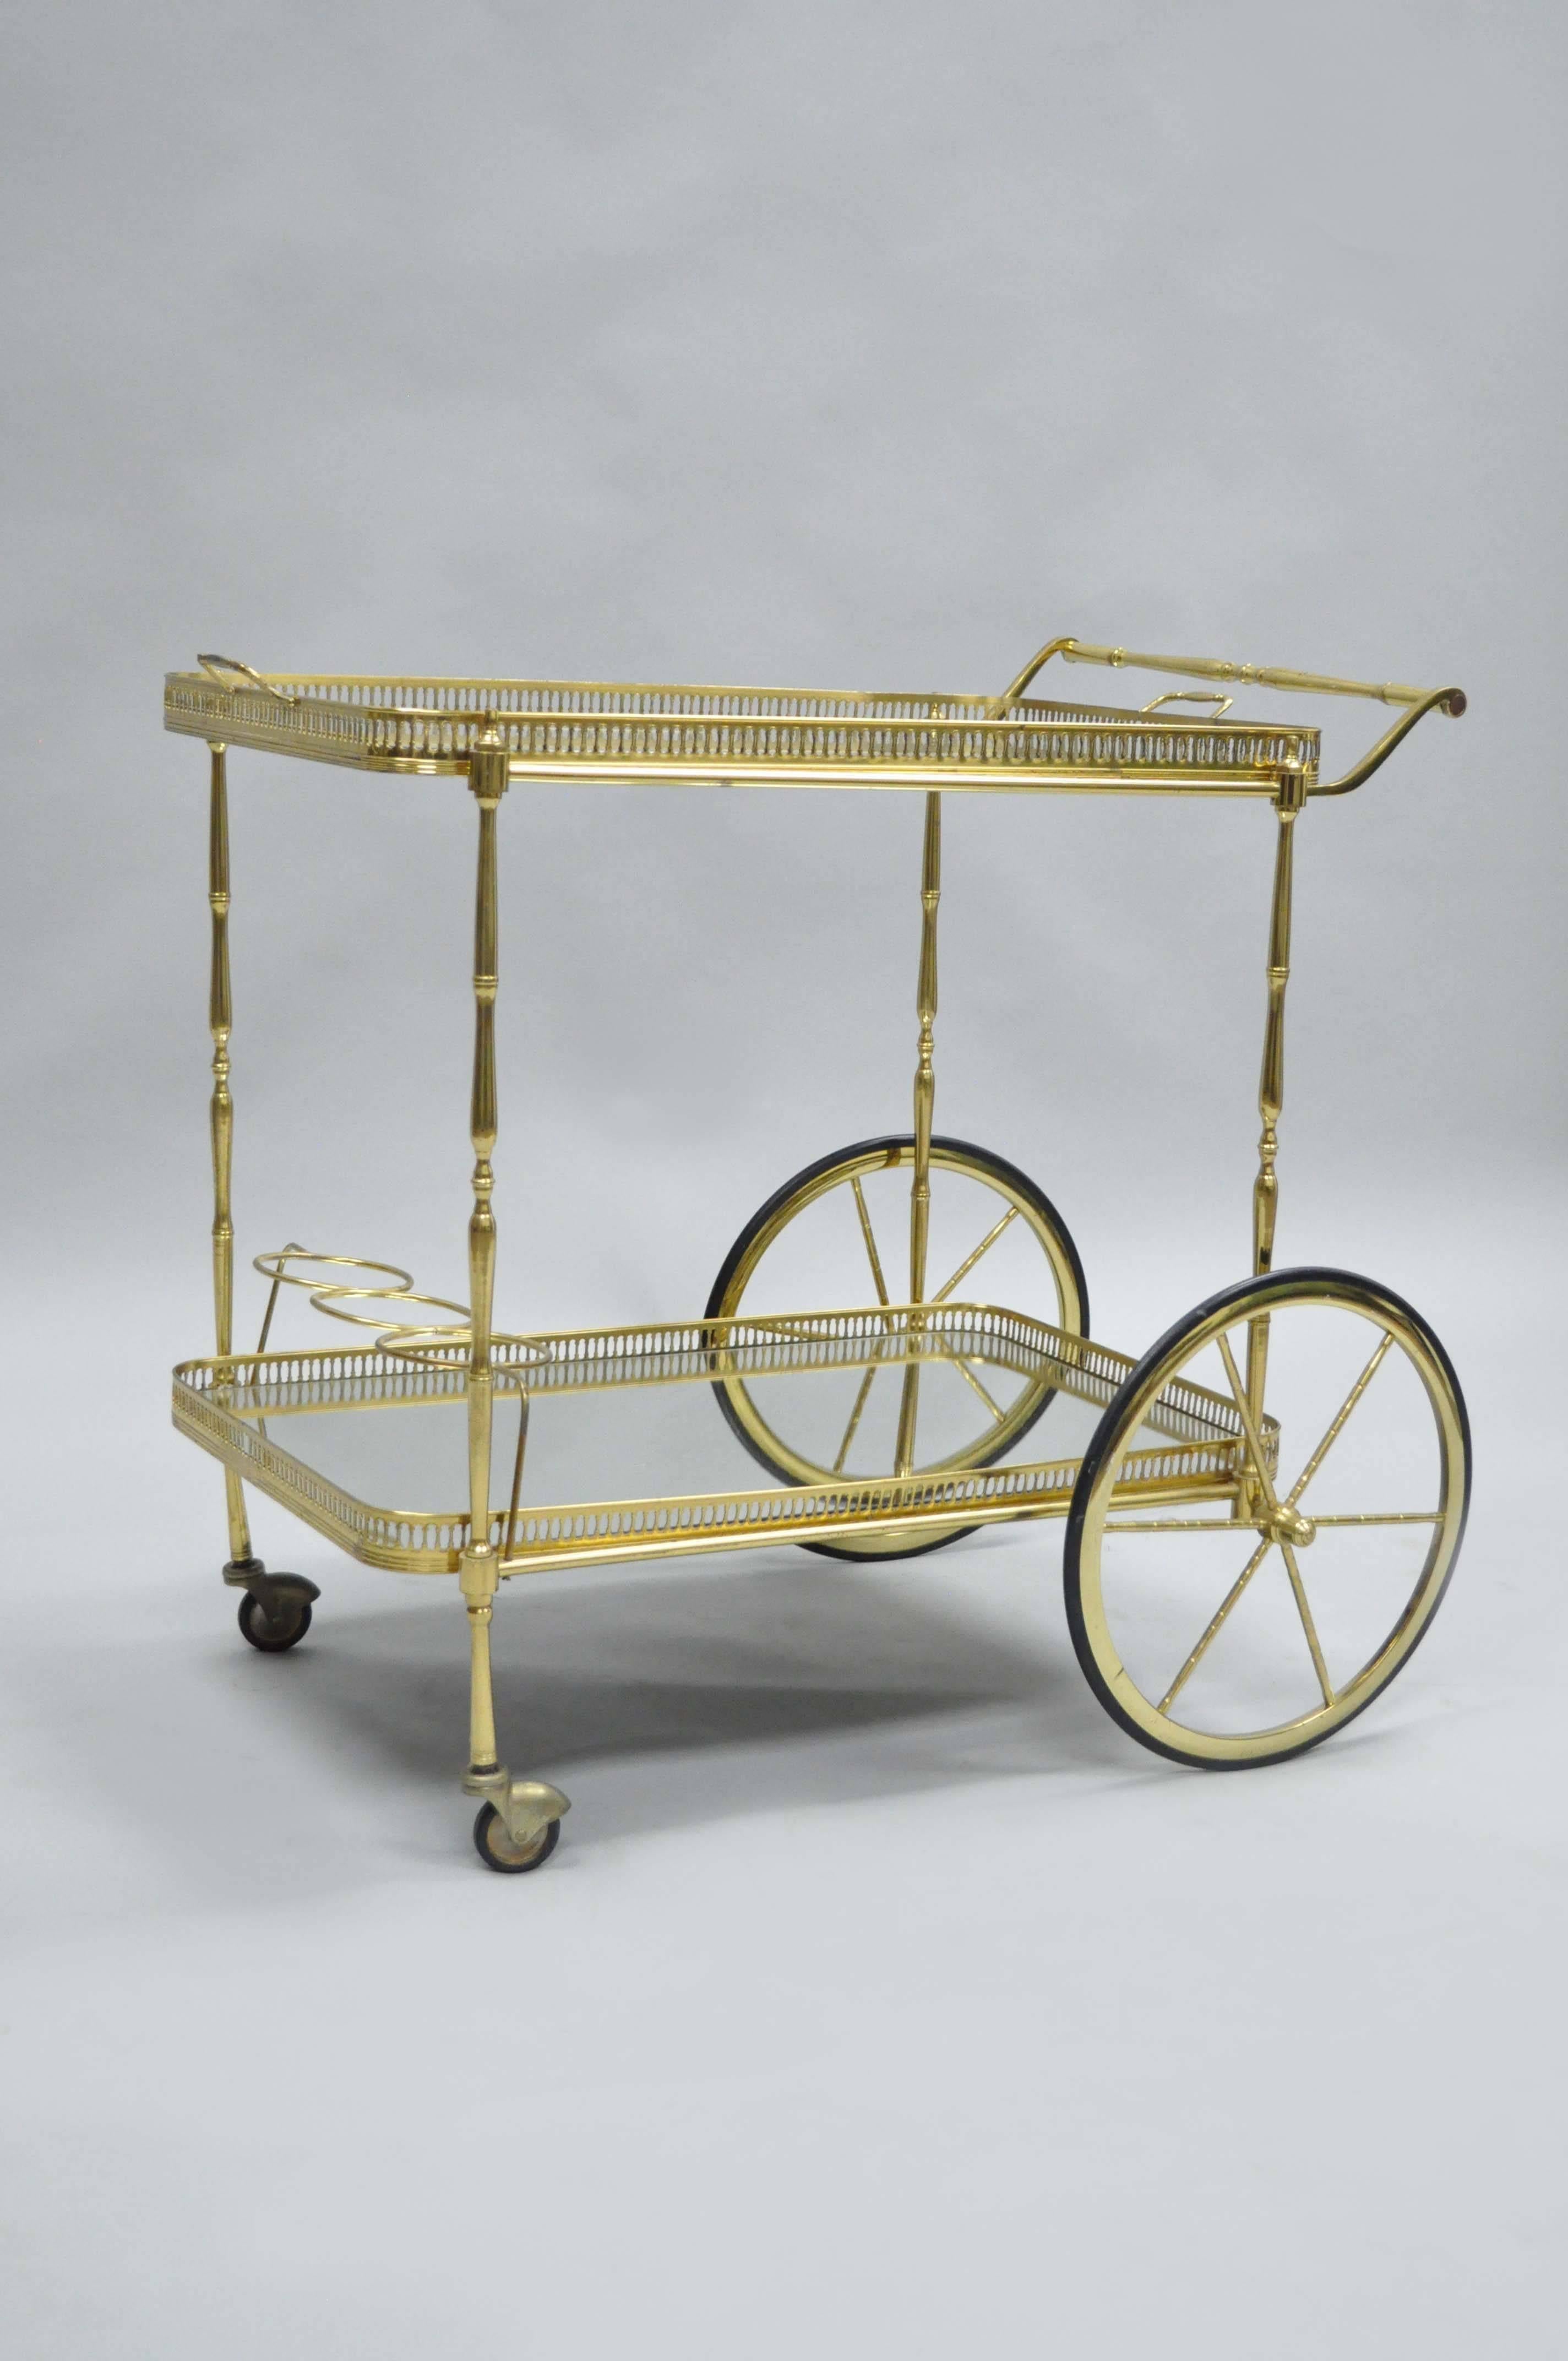 Quality Italian Hollywood Regency brass and mirror tea trolley. Item features a removable serving tray on the upper tier, pierced brass galleries, bottle holders and a solid brass frame. The upper tier of glass is clear in the center with mirrored